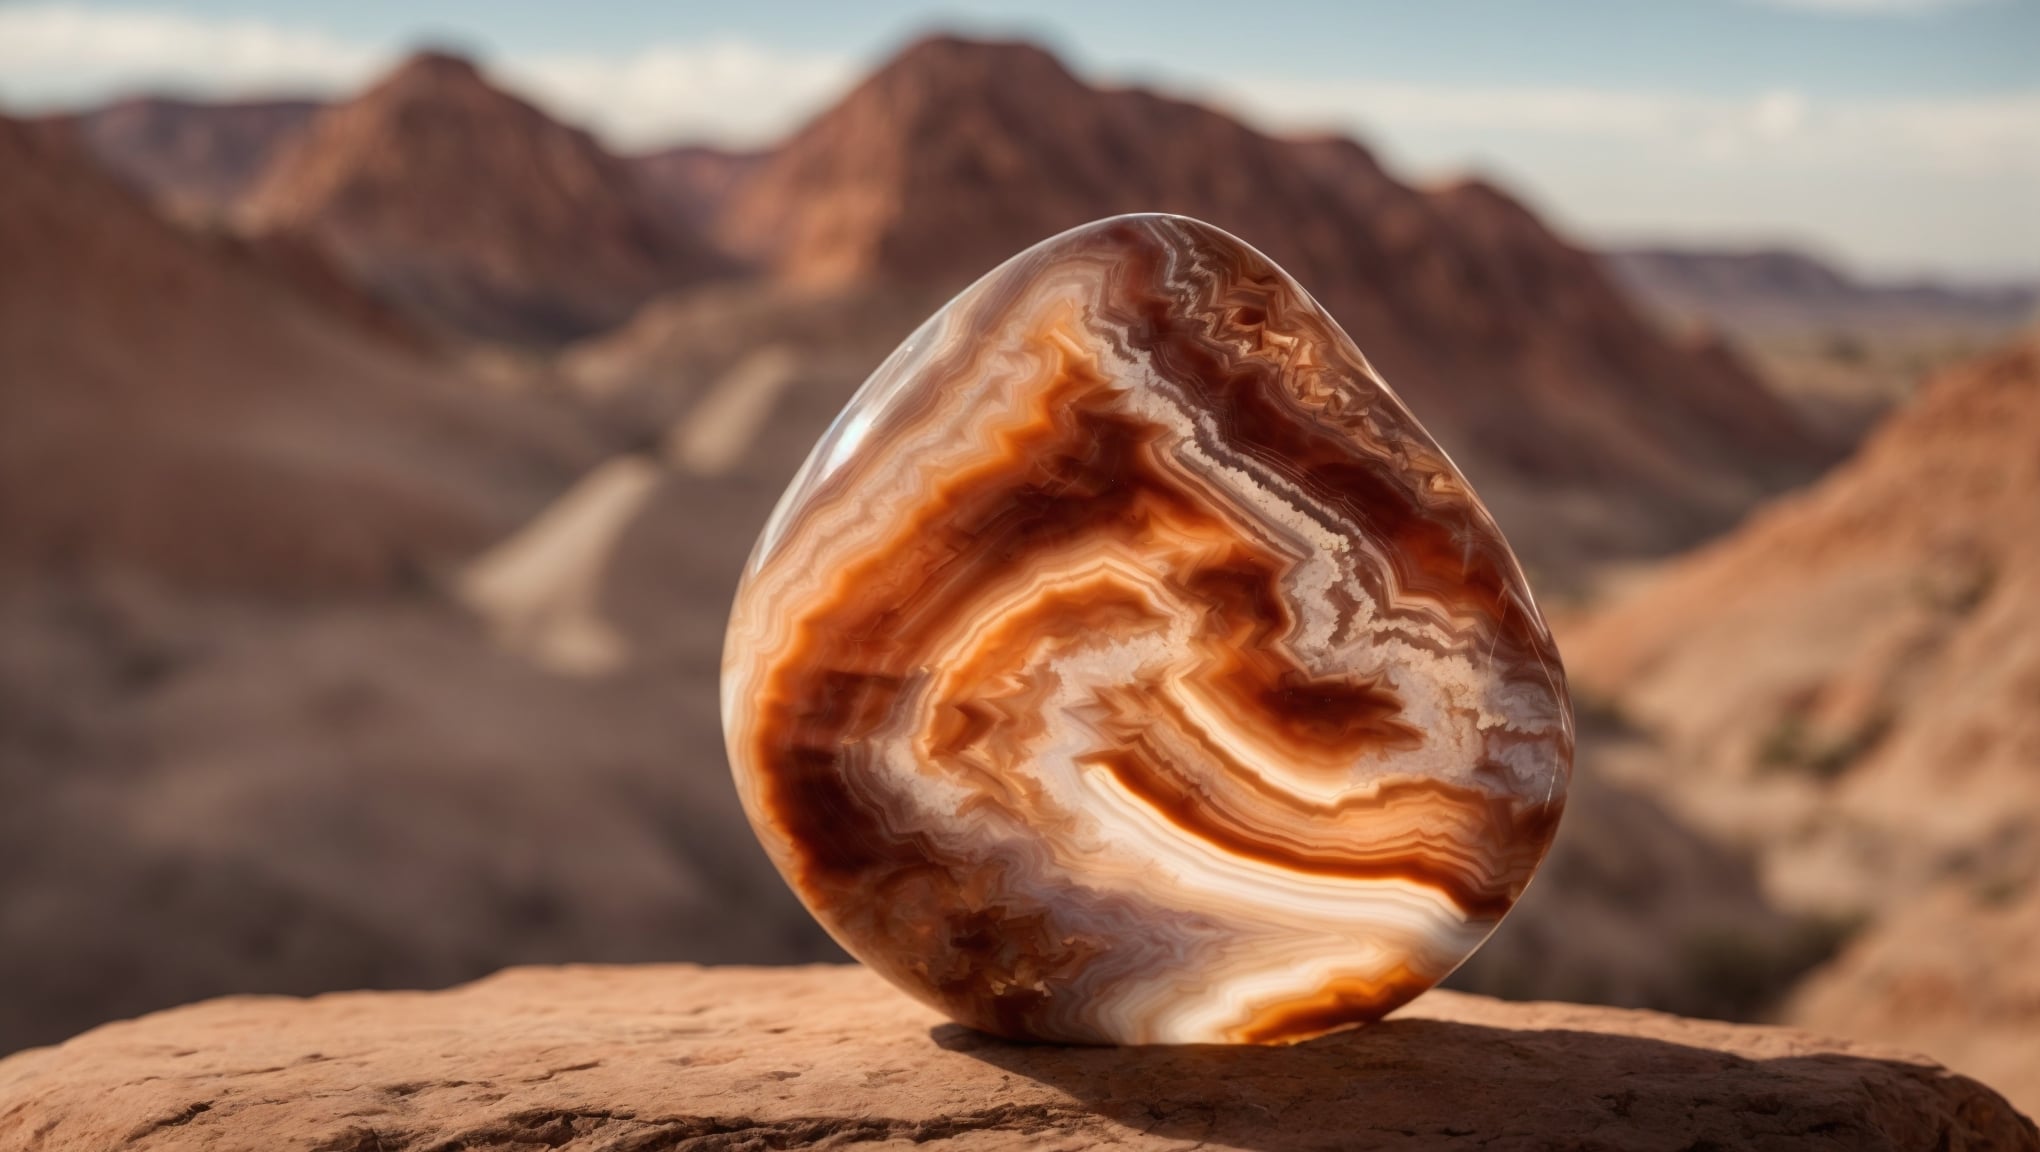 Botswana Agate properties with vibrant patterns